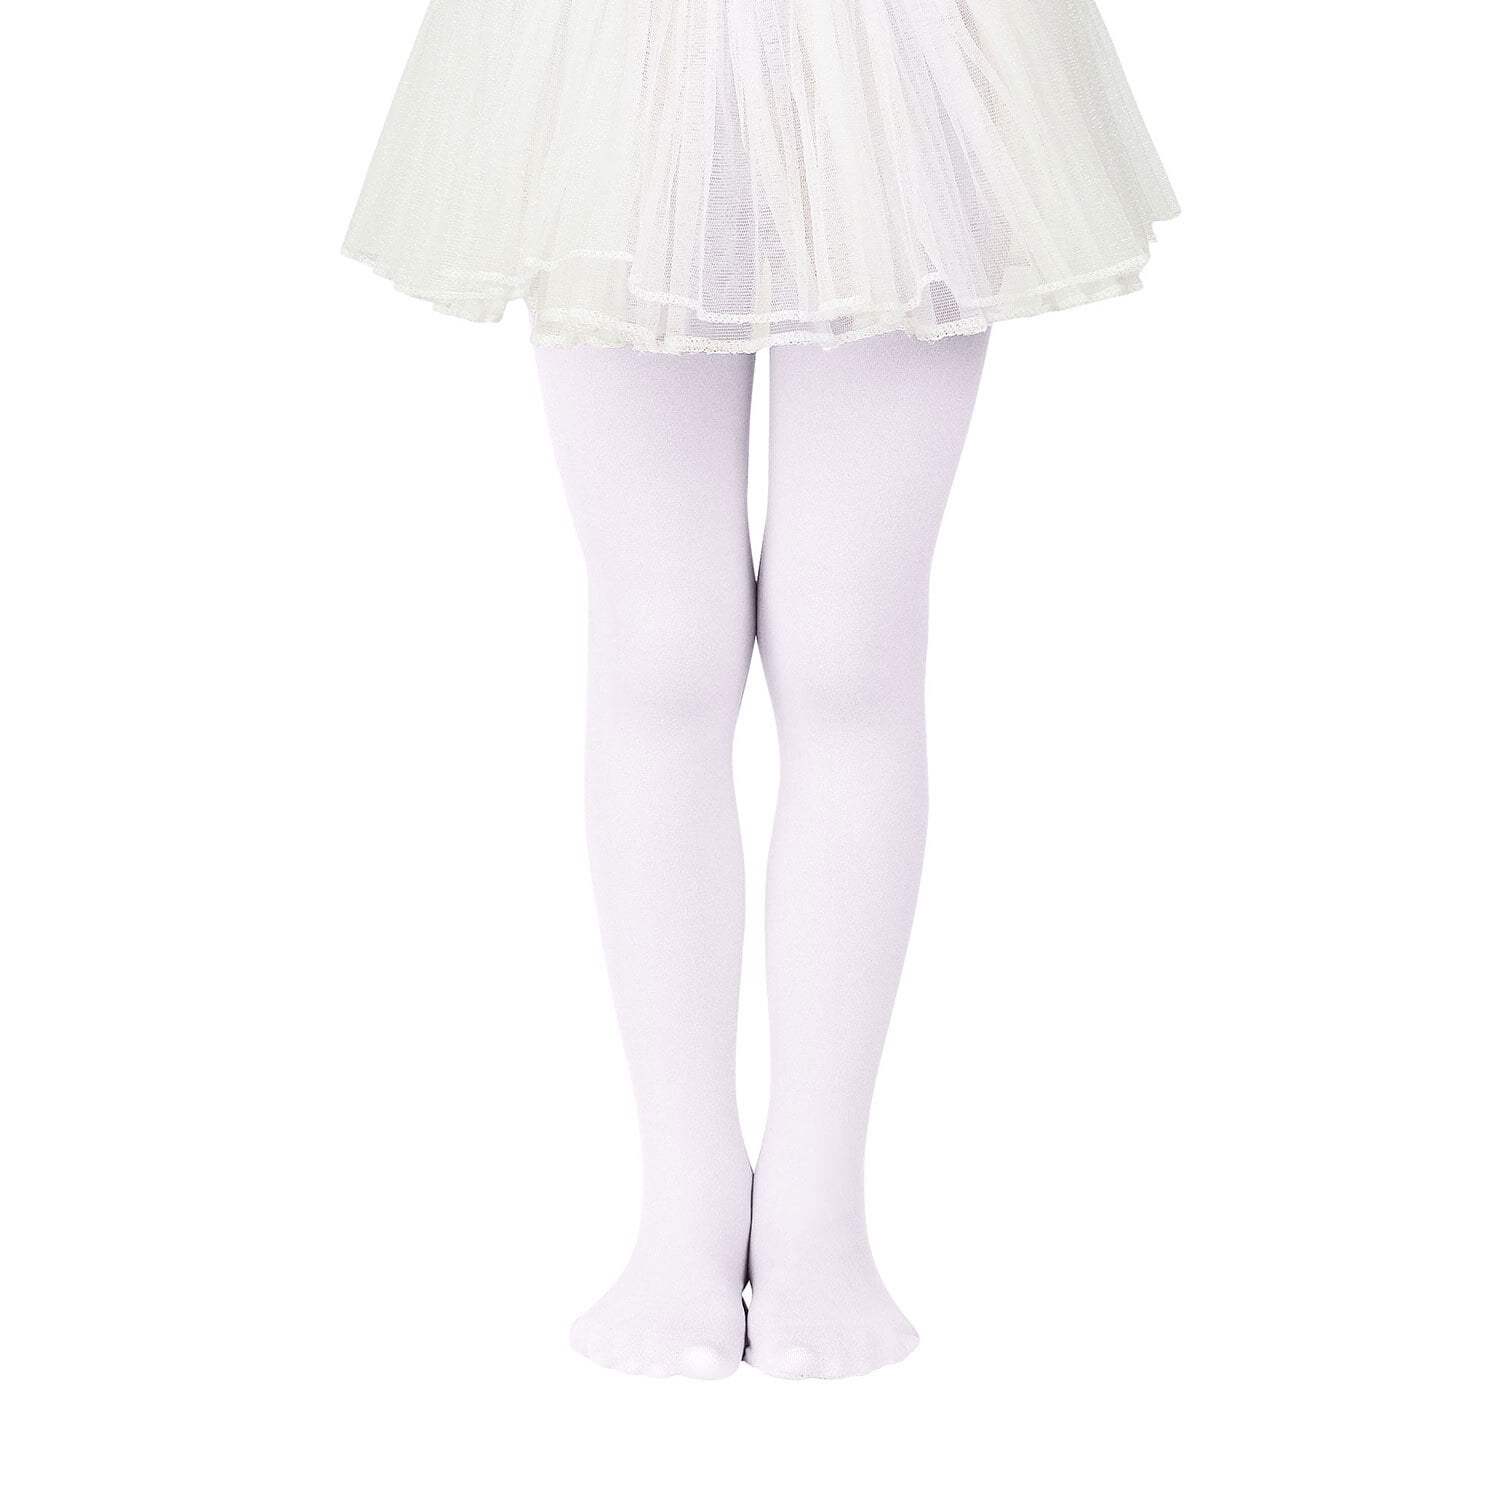 Zando White Ballet Tights for Girls Tights Footed Dance Tights Ultra ...